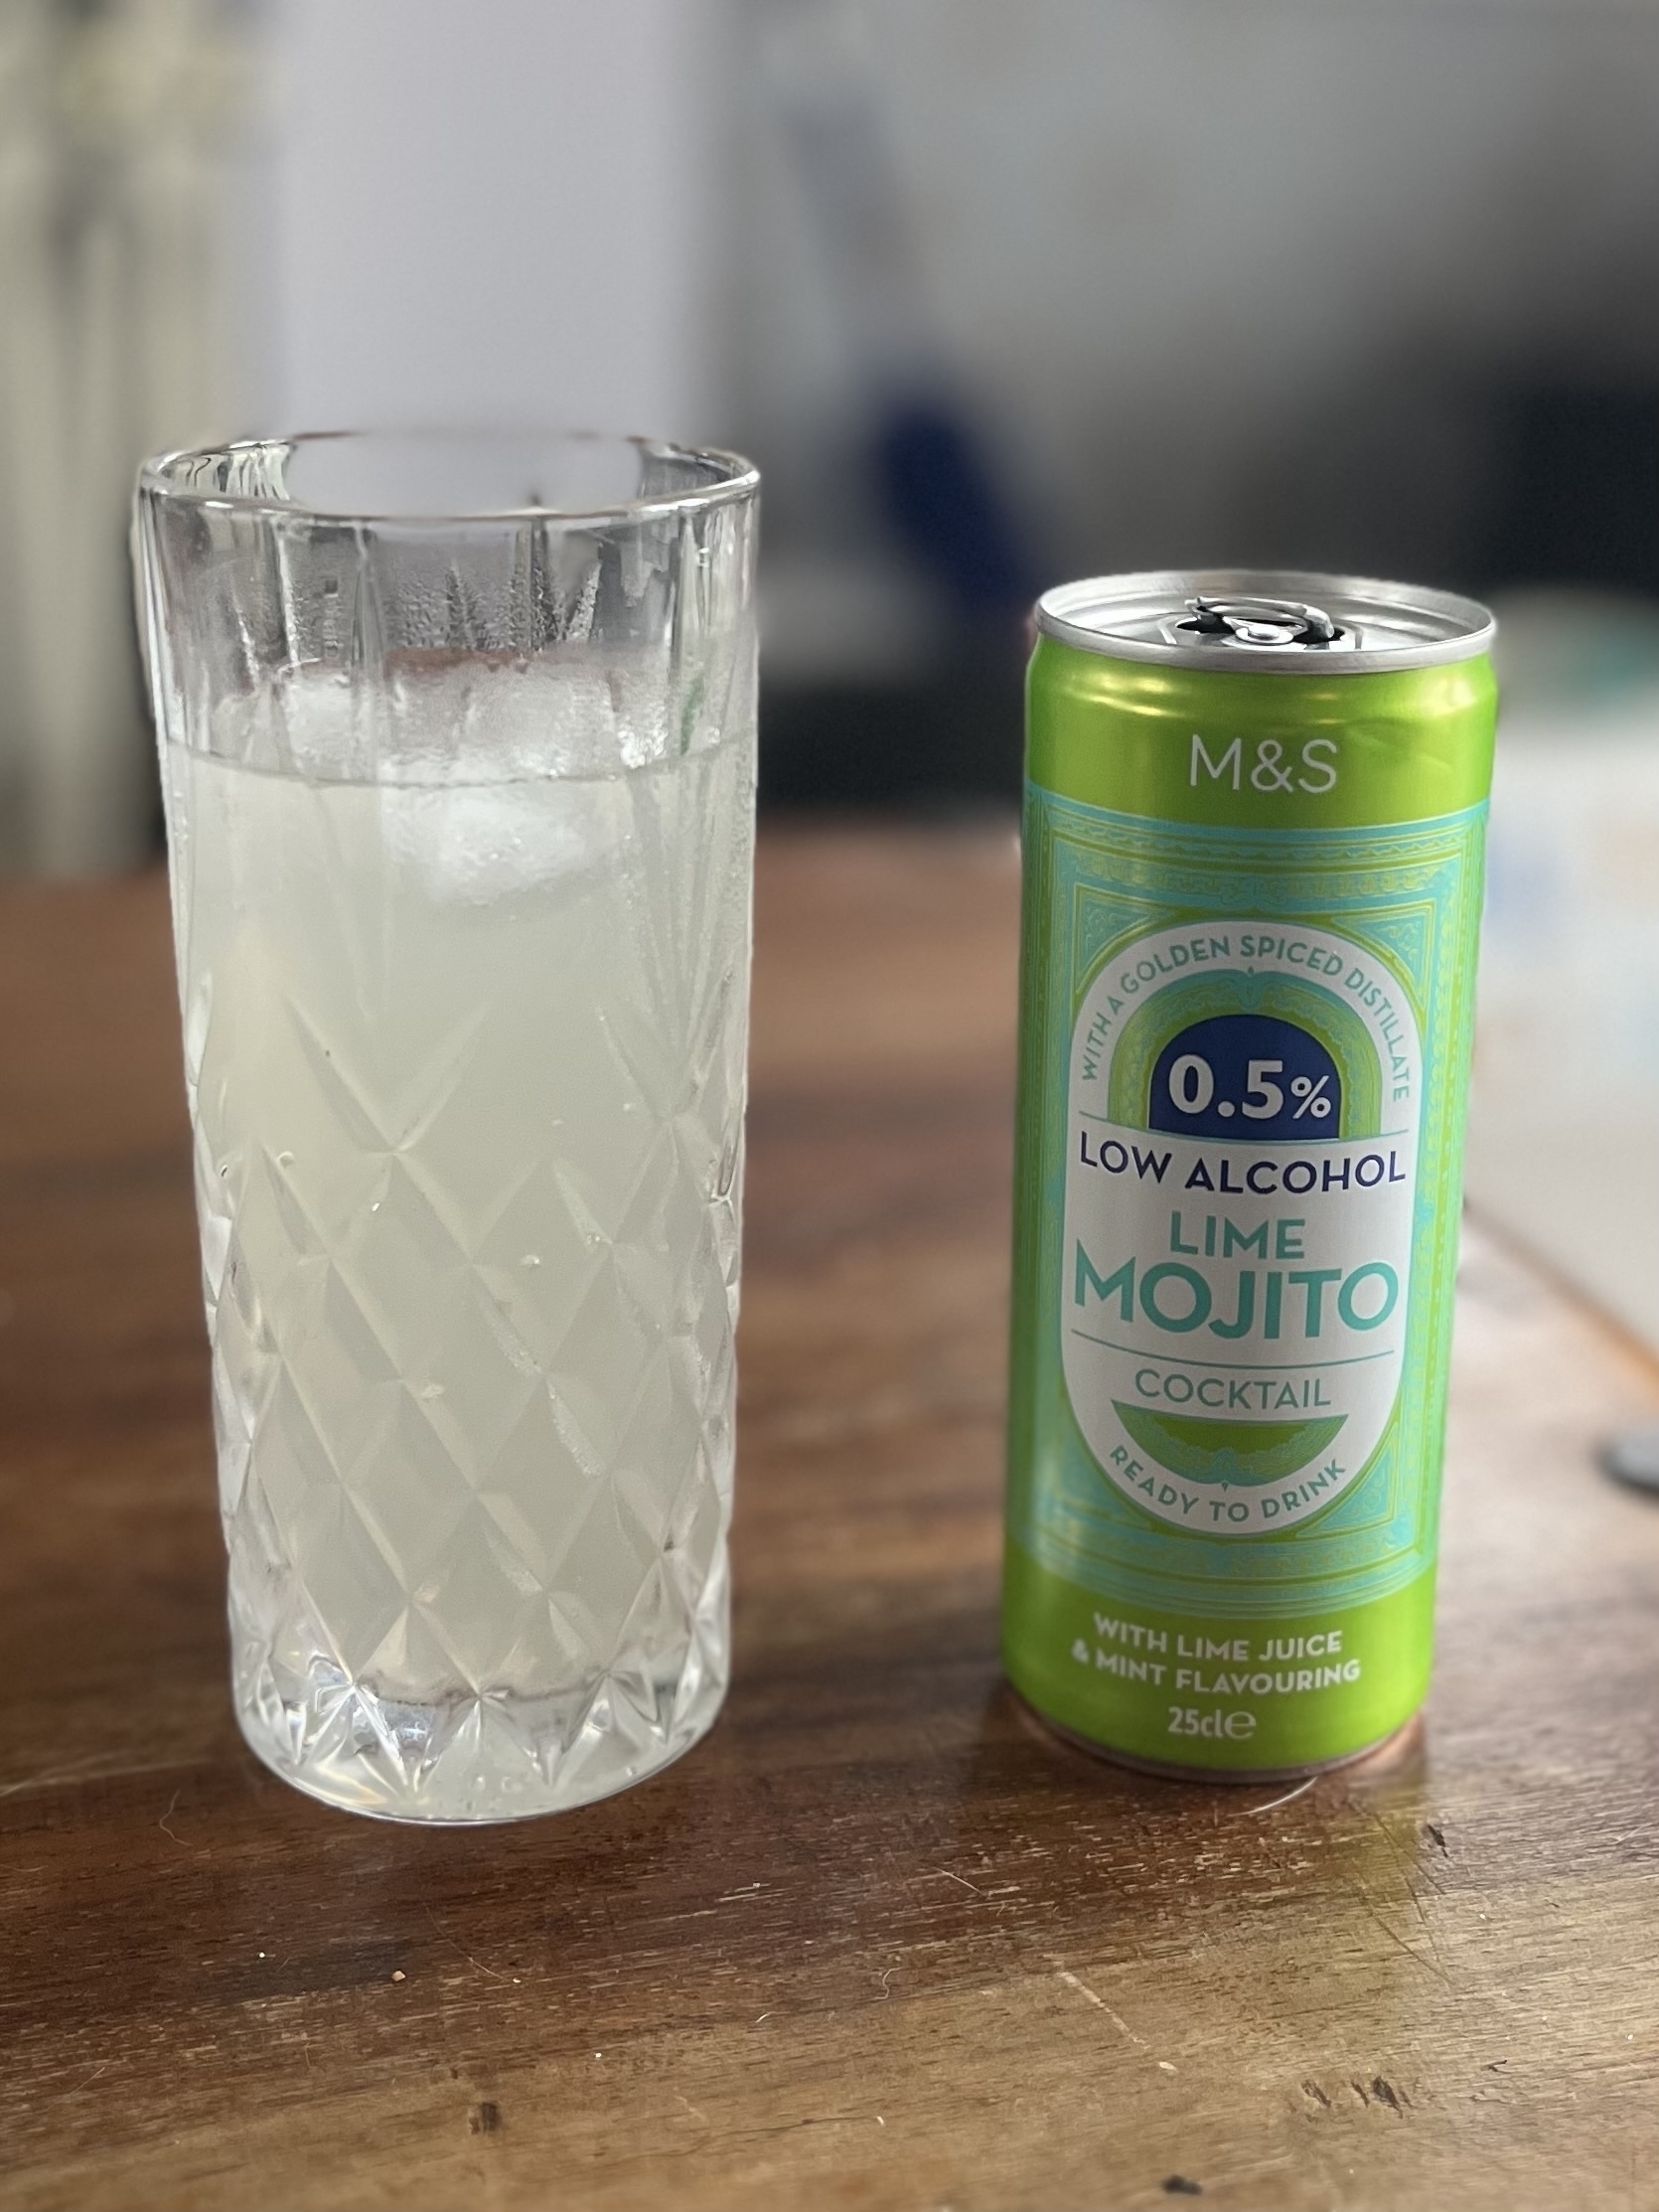 A glass of cloudy liquid and a green can of low alcohol lime mojito. 